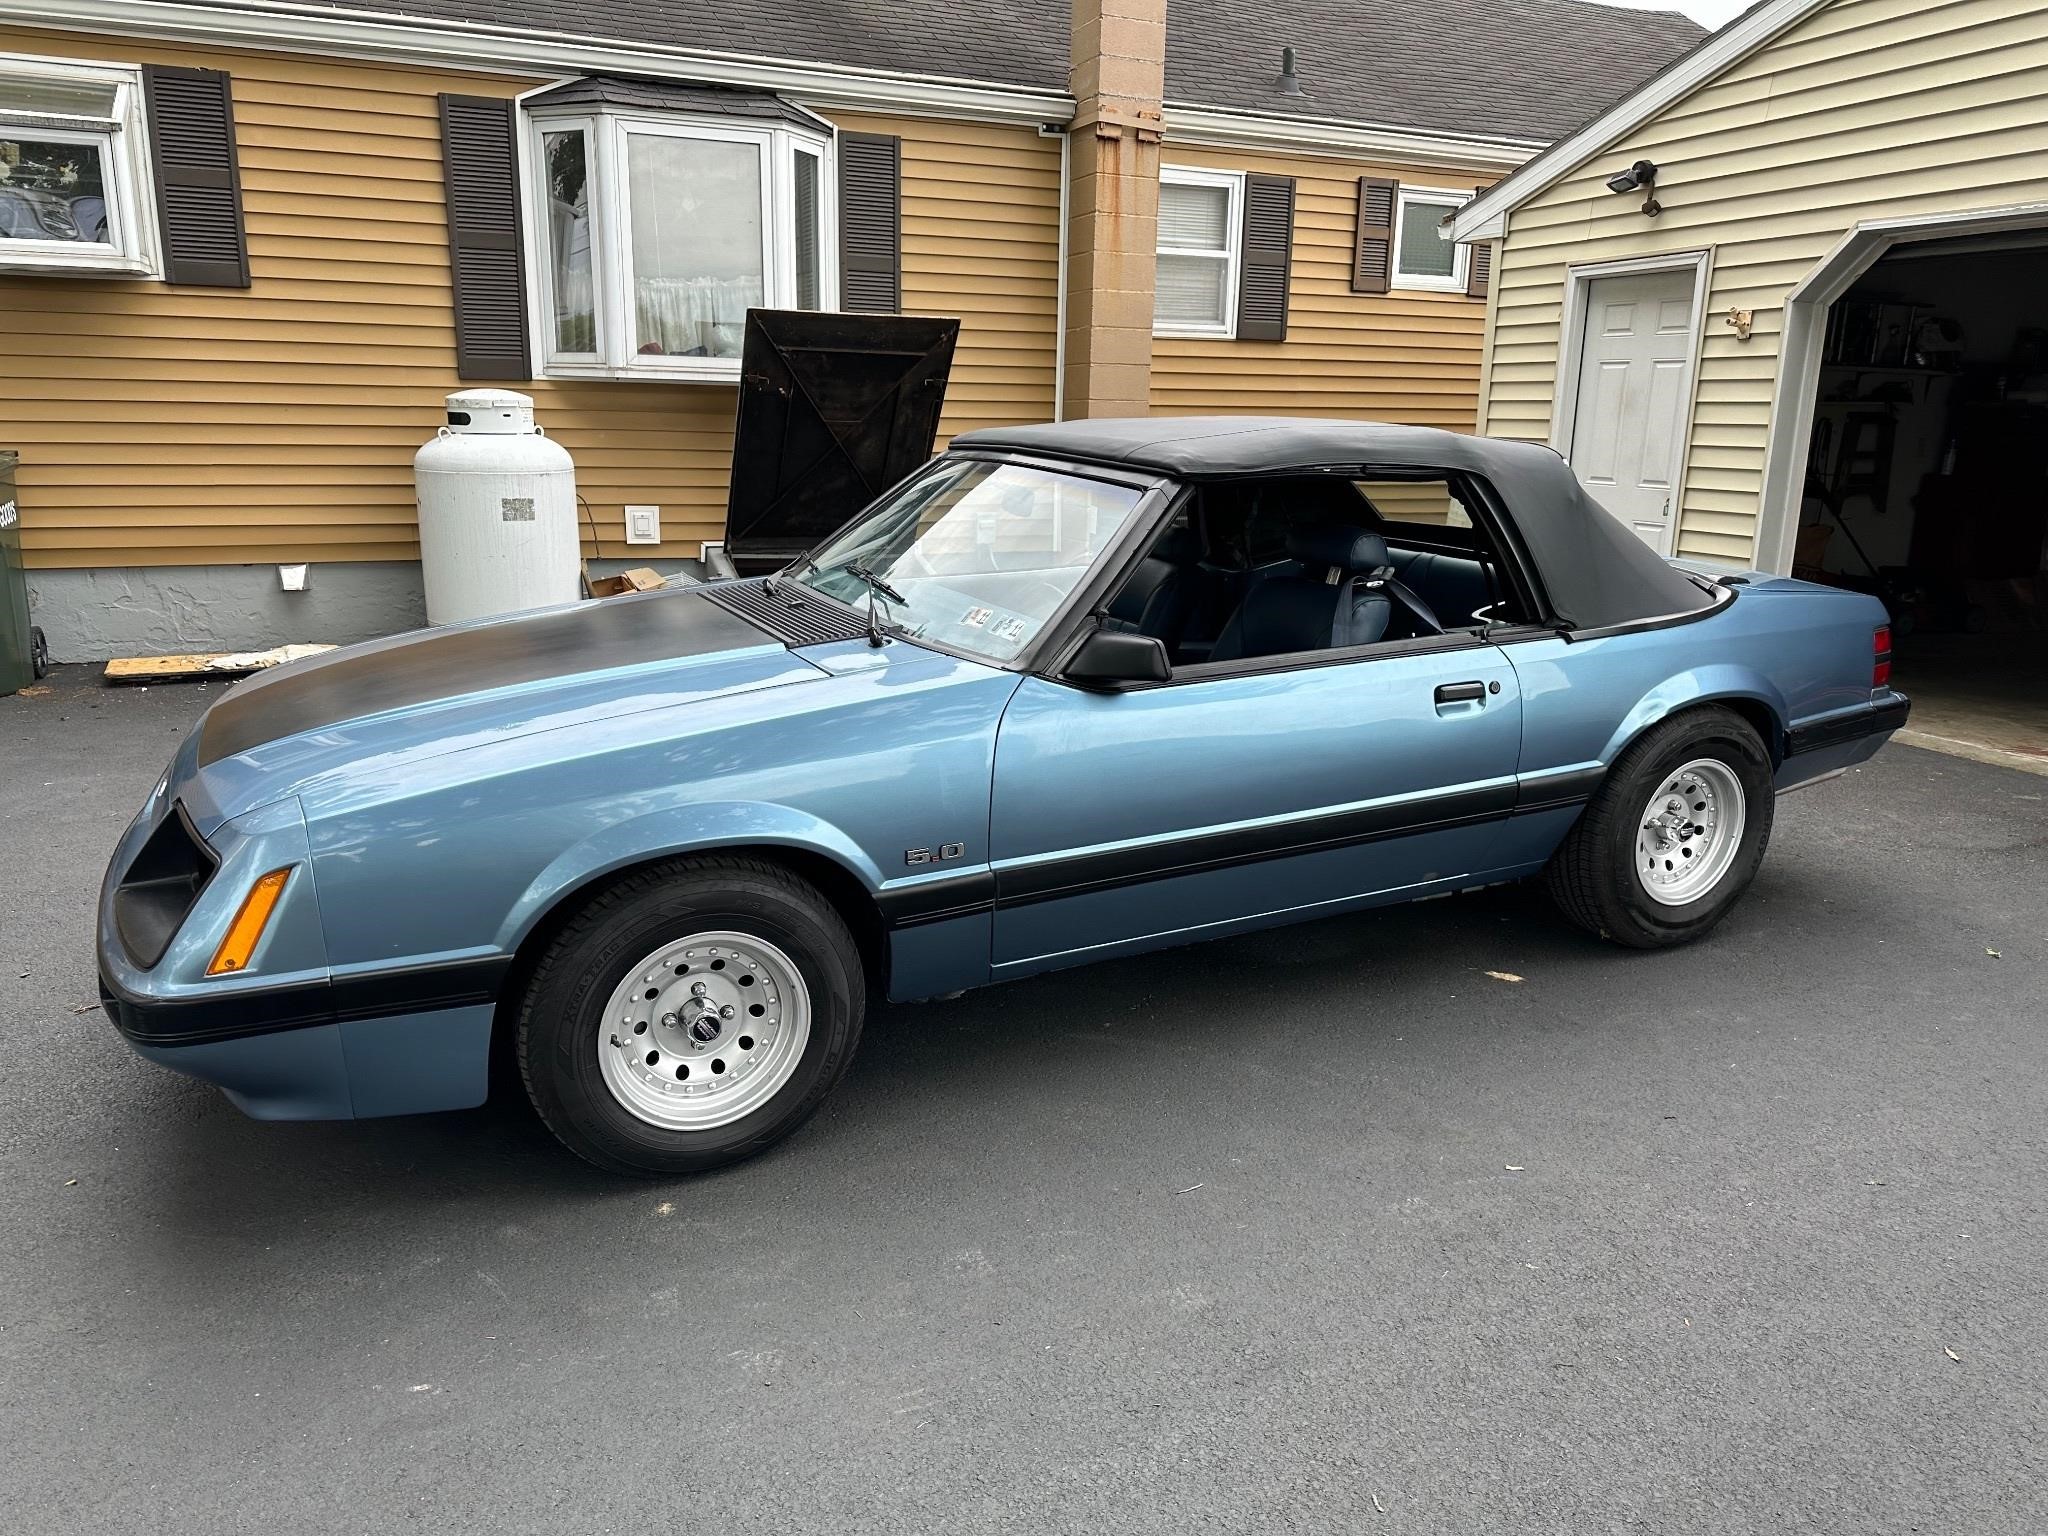 1985 Ford Mustang LX Convertible Car**